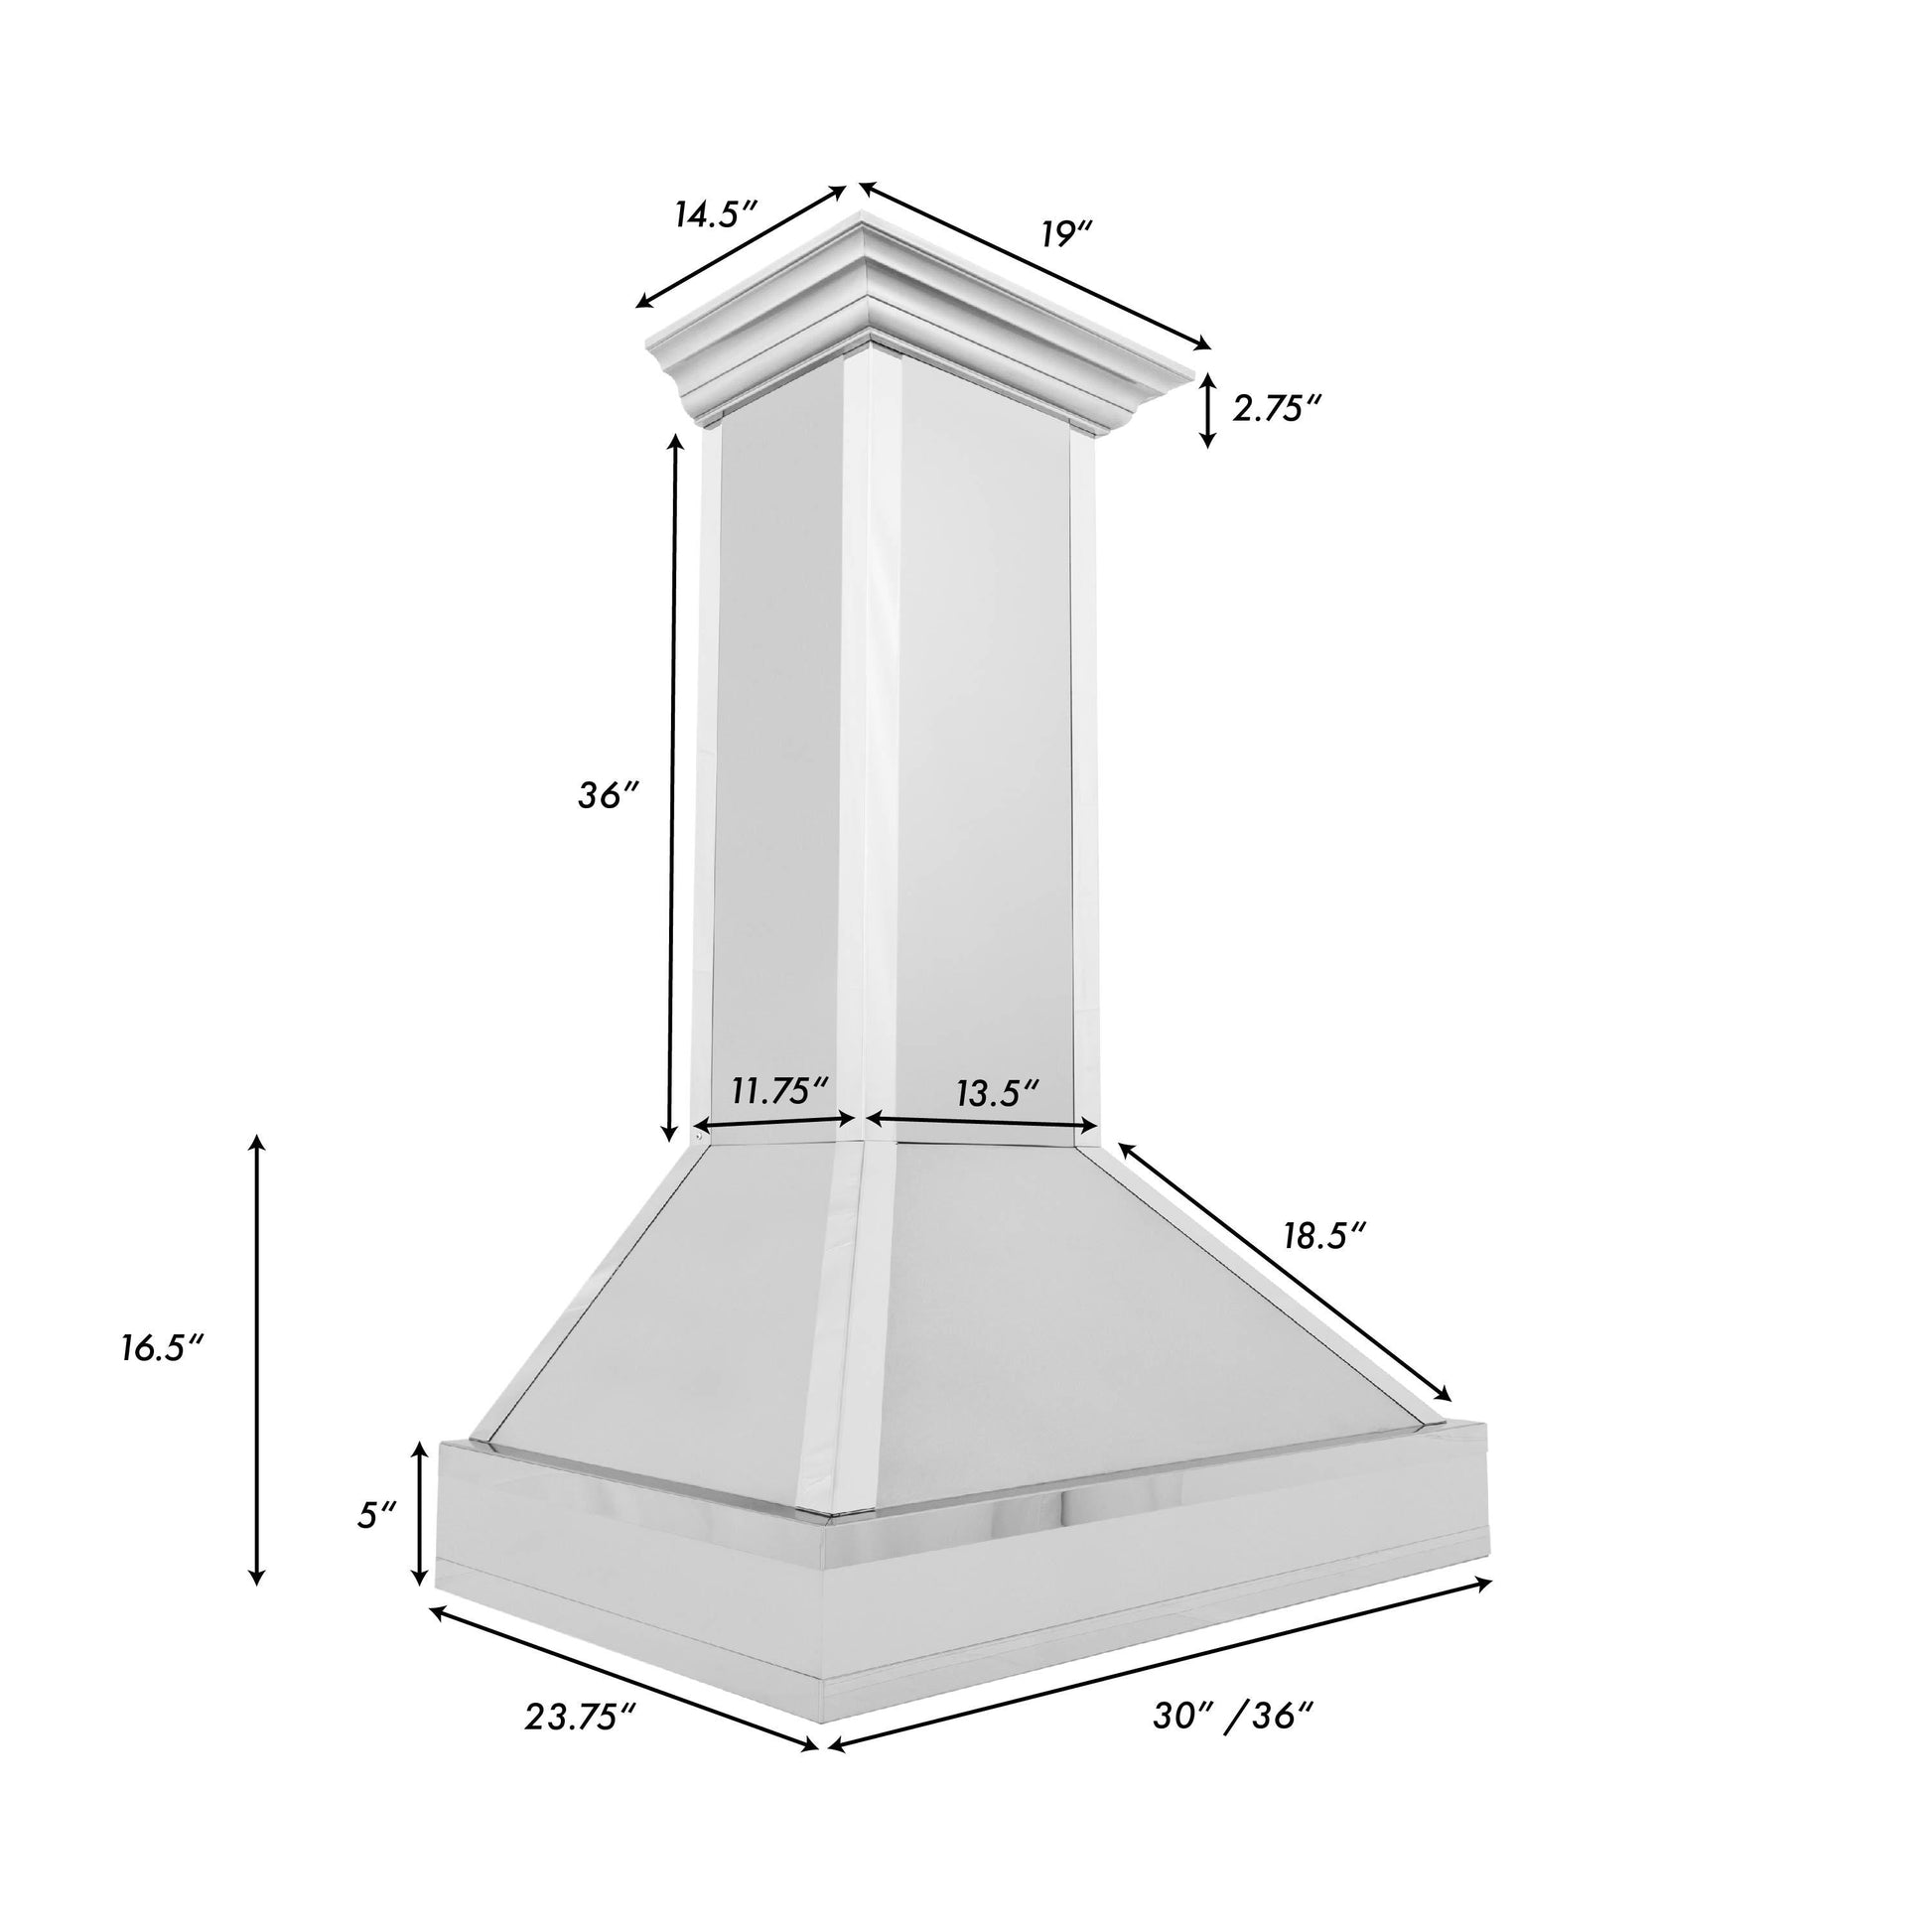 ZLINE Designer Series Wall Mount Range Hood in Fingerprint Resistant Stainless Steel with Mirror Accents (655MR) dimensional diagram with measurements.